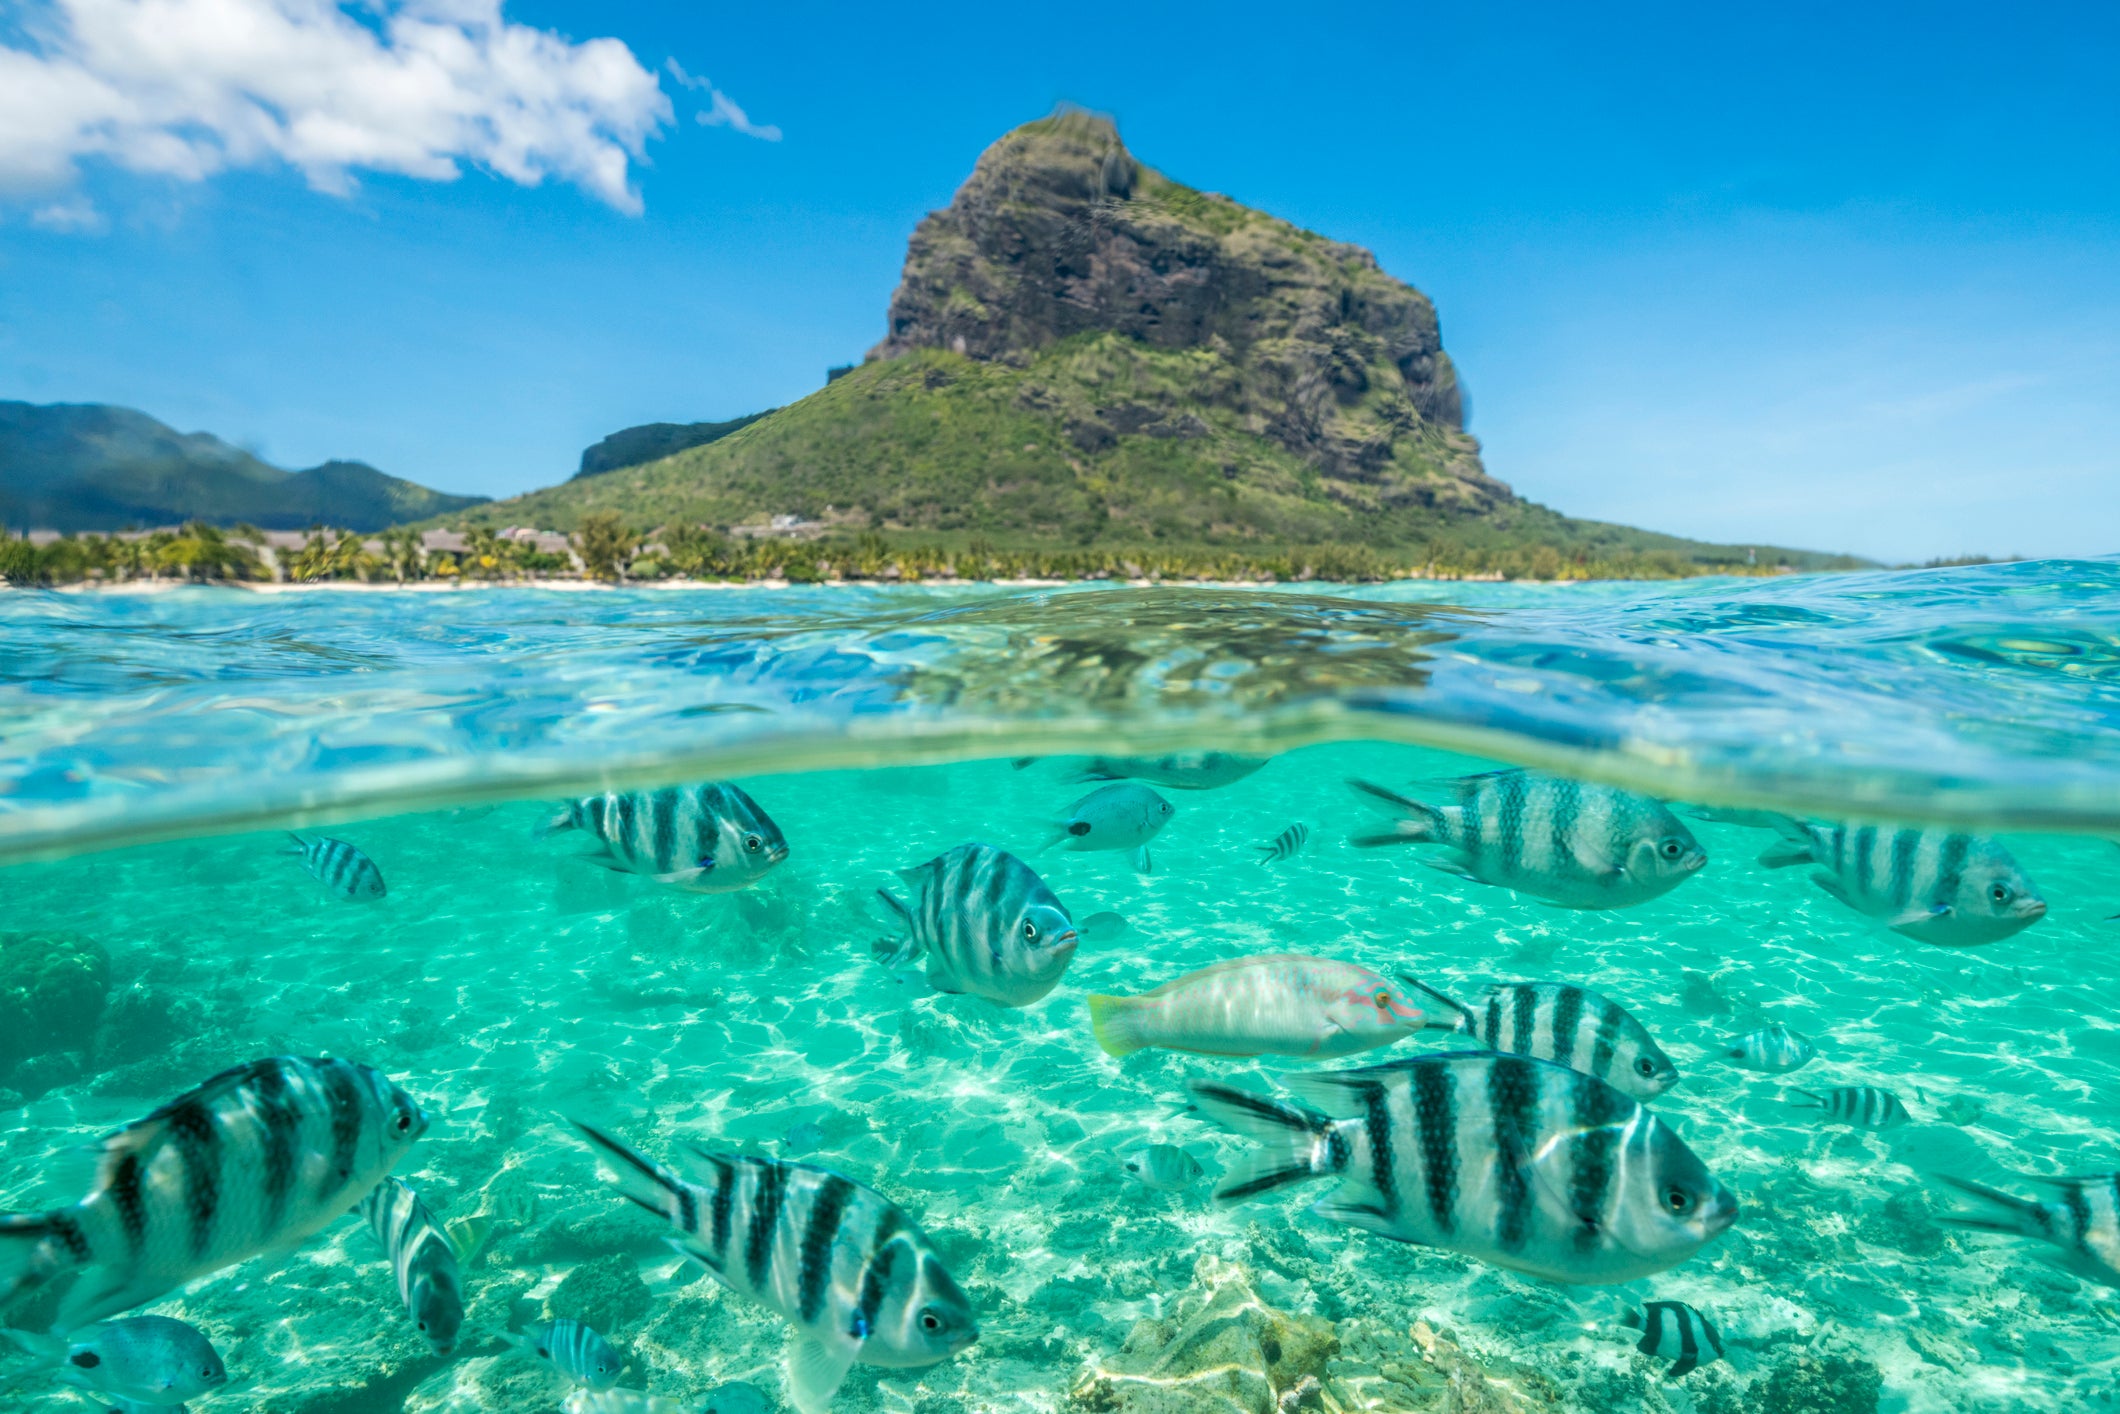 Le Morne Brabant, Black River district, Indian Ocean, Mauritius (Photo by Roberto Moiola/Getty Images)